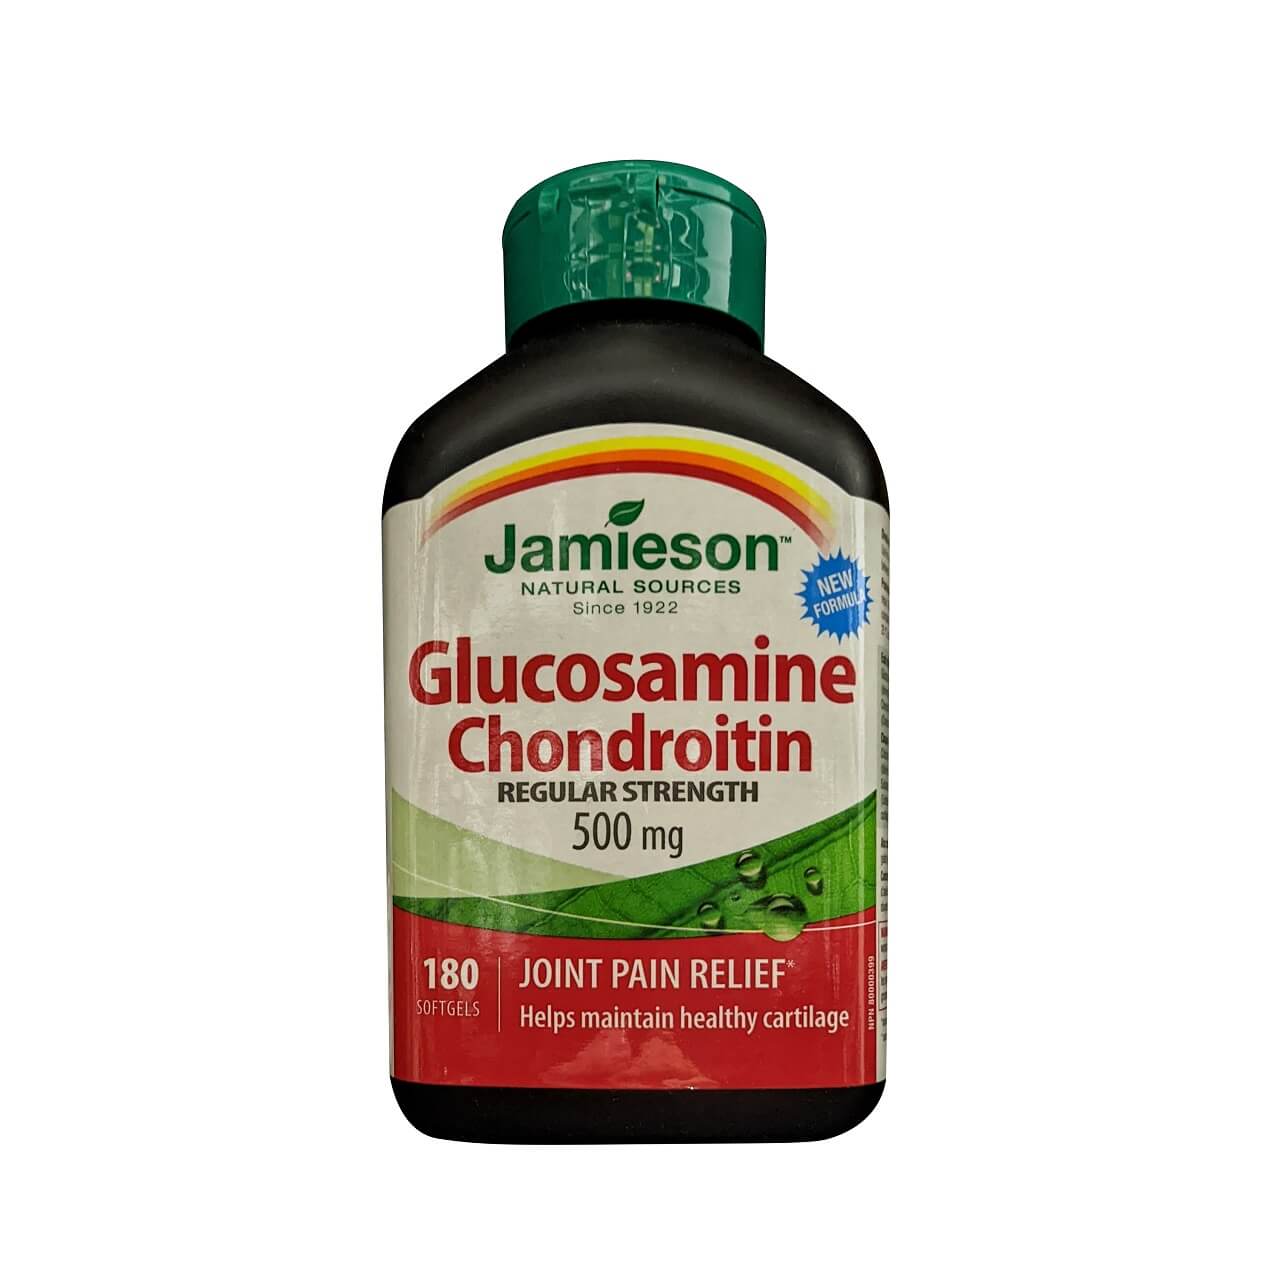 Product label for Jamieson Glucosamine Chondroitin Regular Strength 500 mg (180 softgels) in English